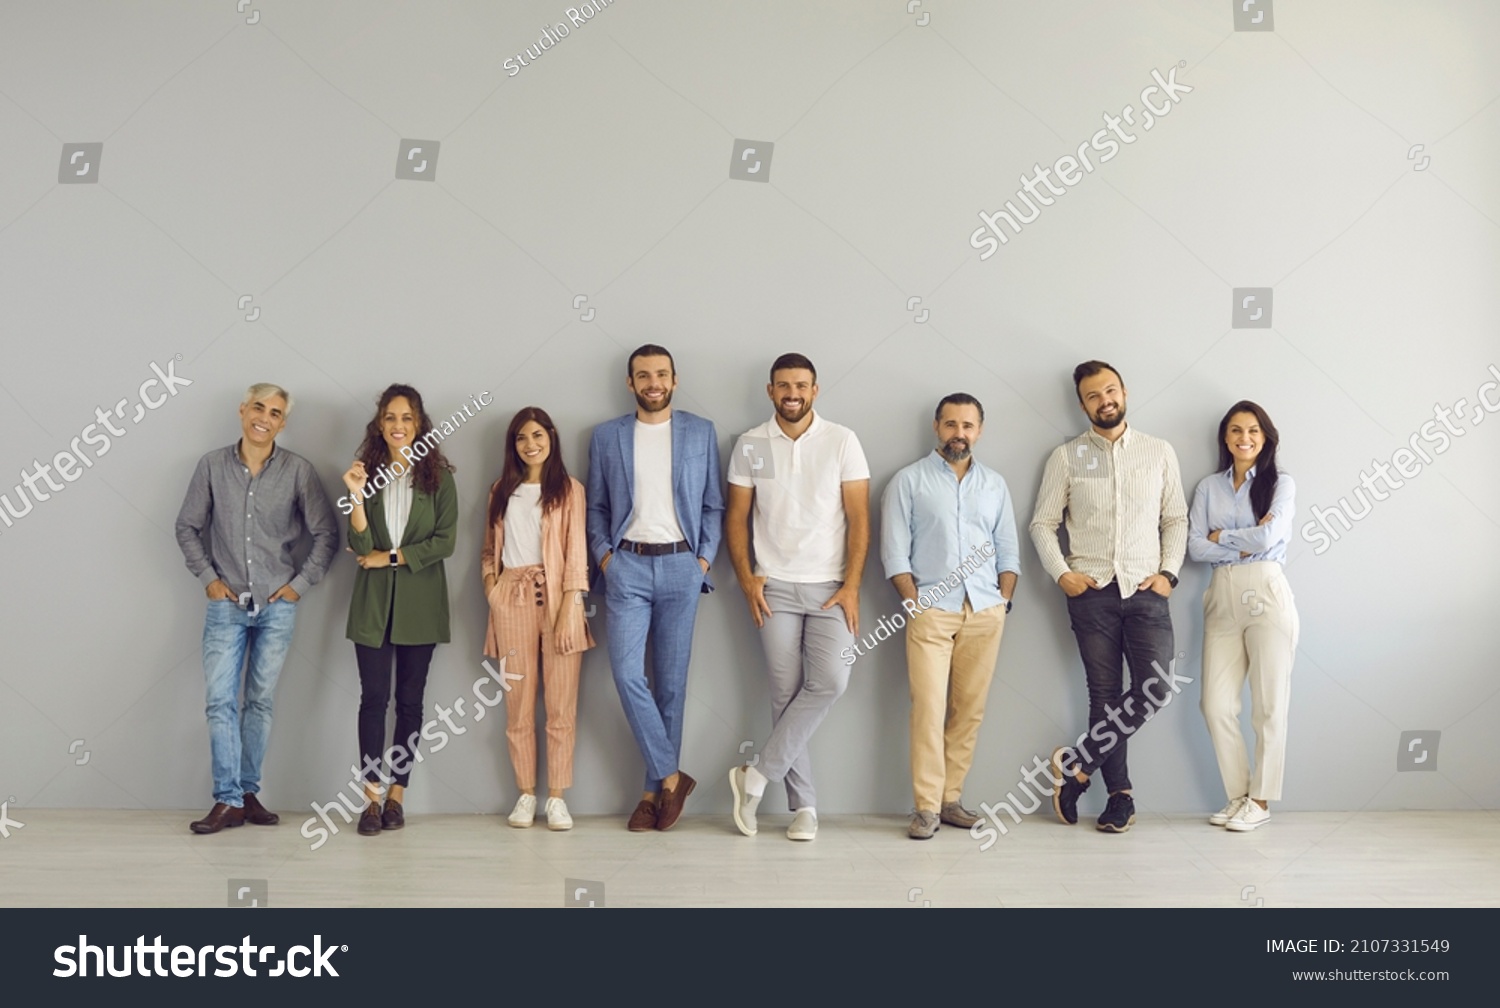 Full body portrait of happy business people in smart and casual clothes. Full length group of senior and young Caucasian men and women posing against grey studio wall. Clothing and fashion concept #2107331549